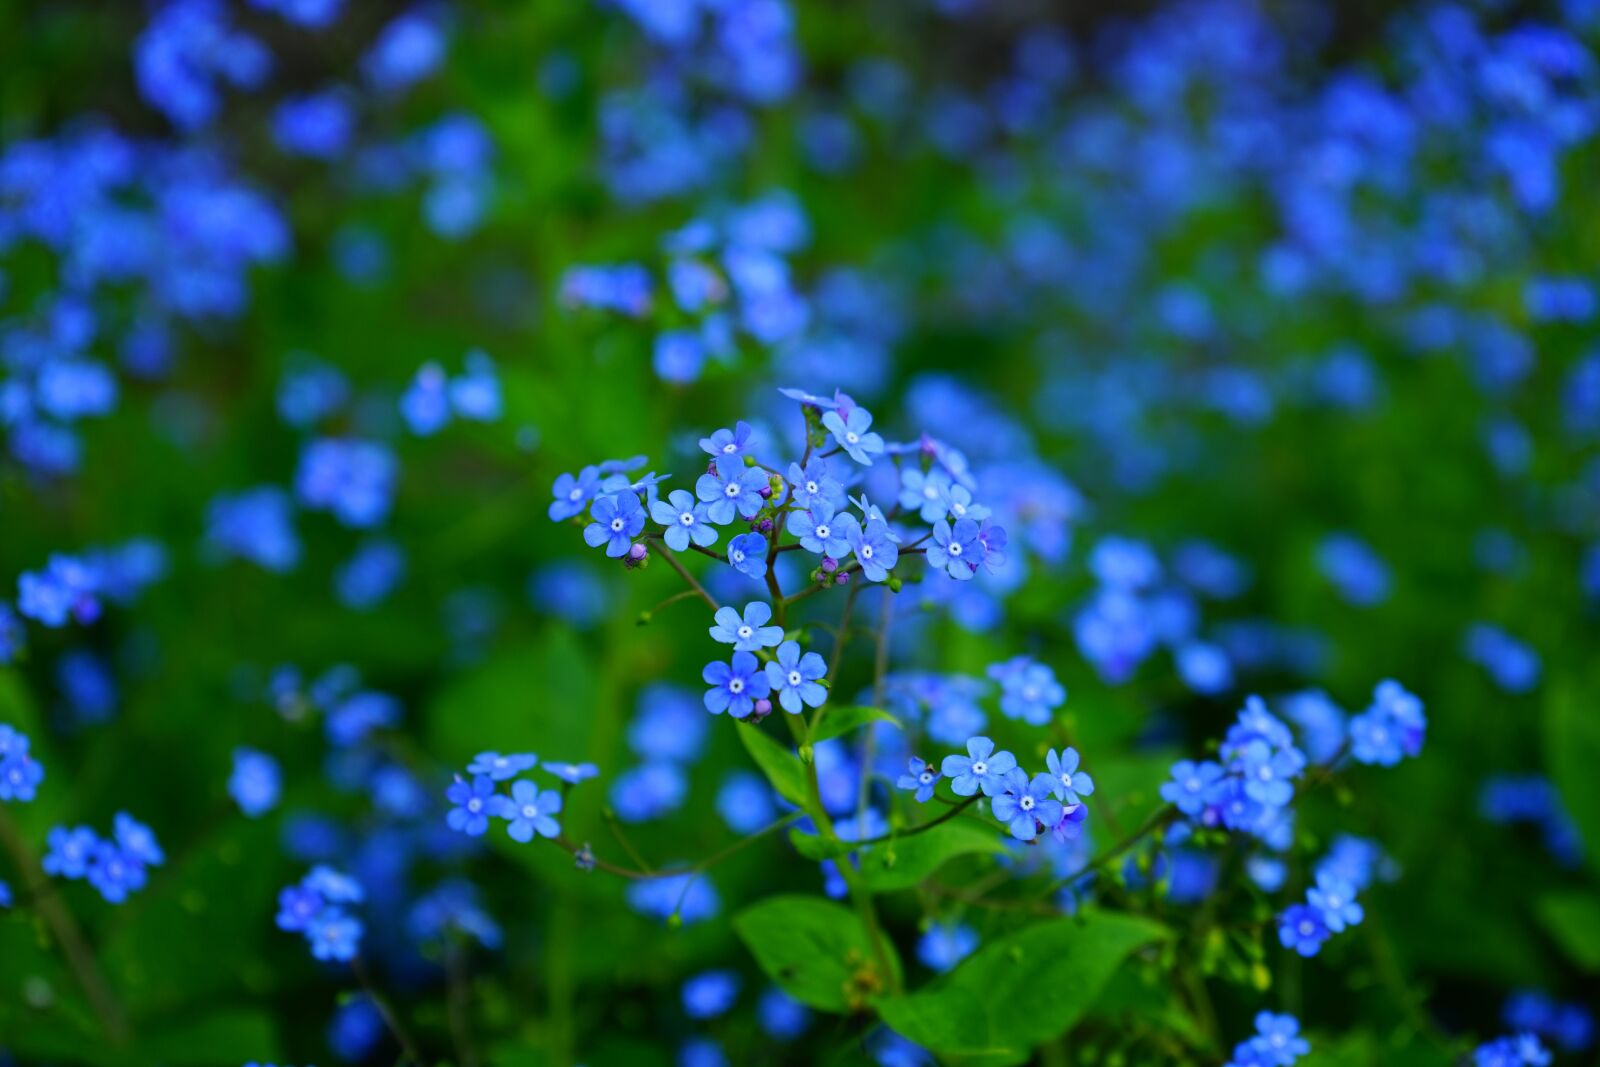 Sony a7 sample photo. Forget me not, flower photography